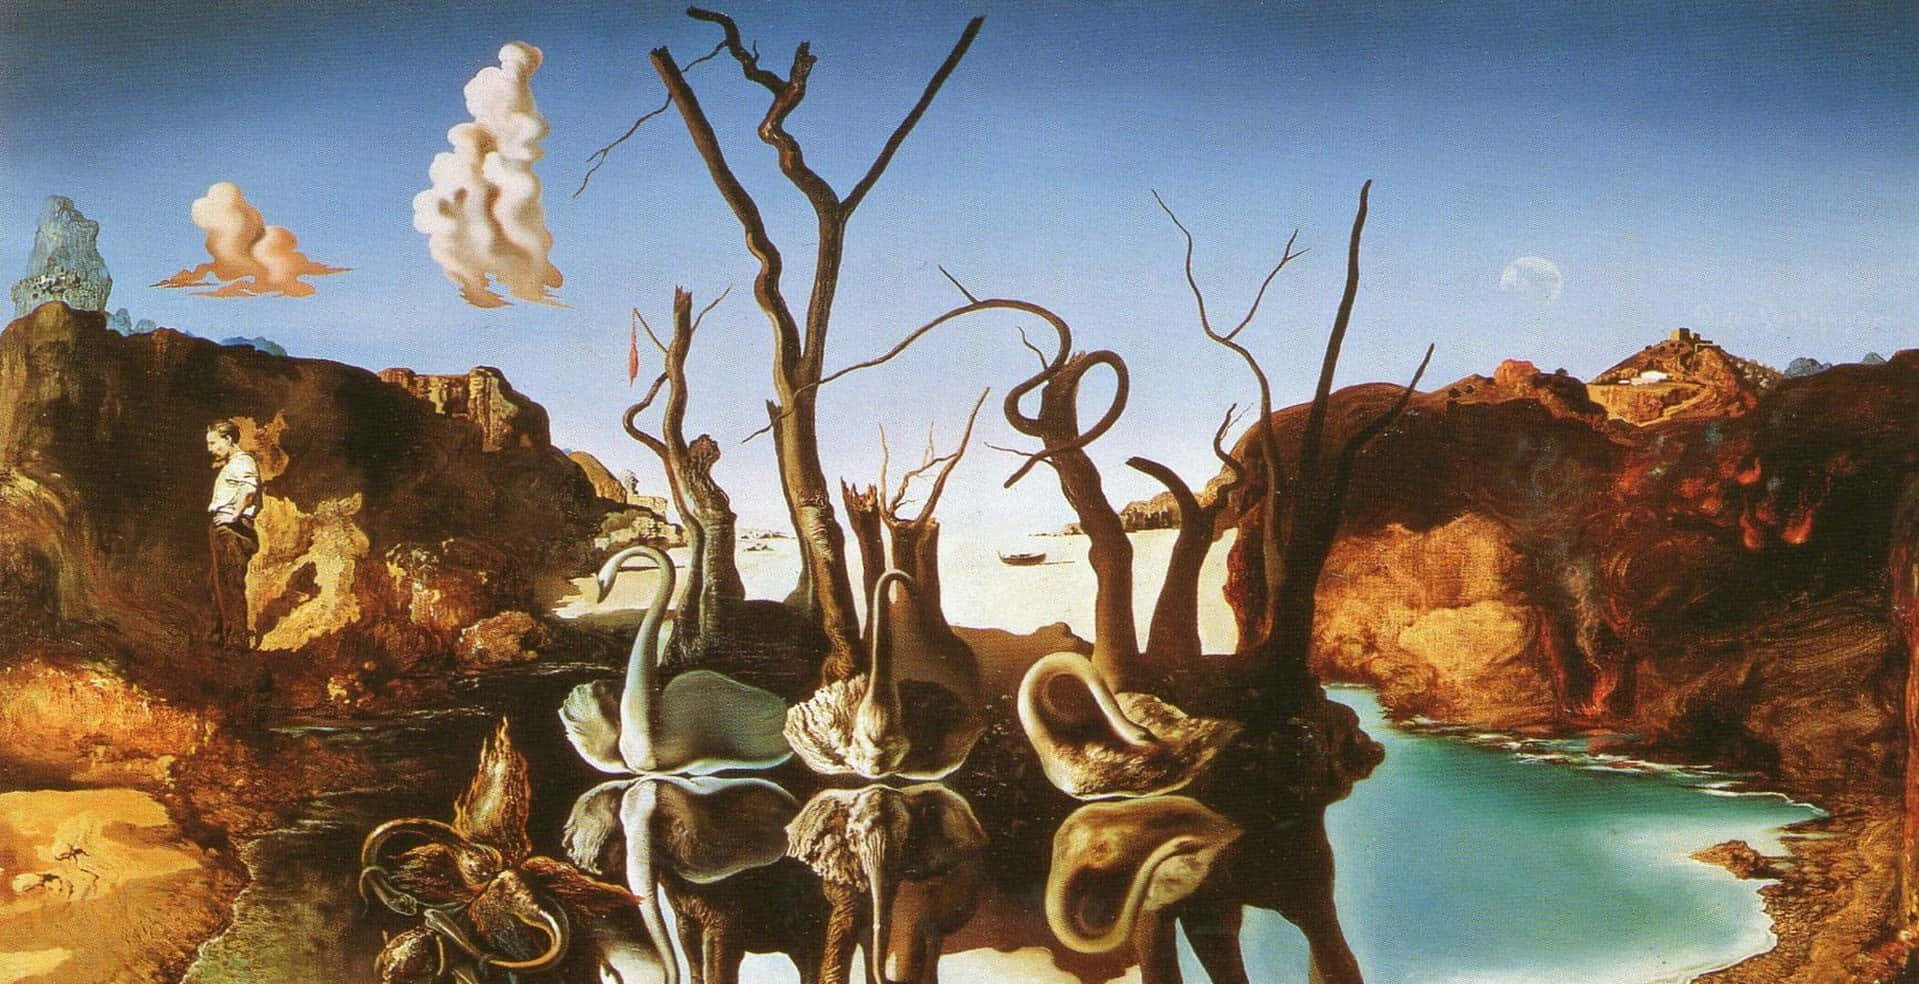 Surreal Dreamscape Hand Painted by Salvador Dali Wallpaper